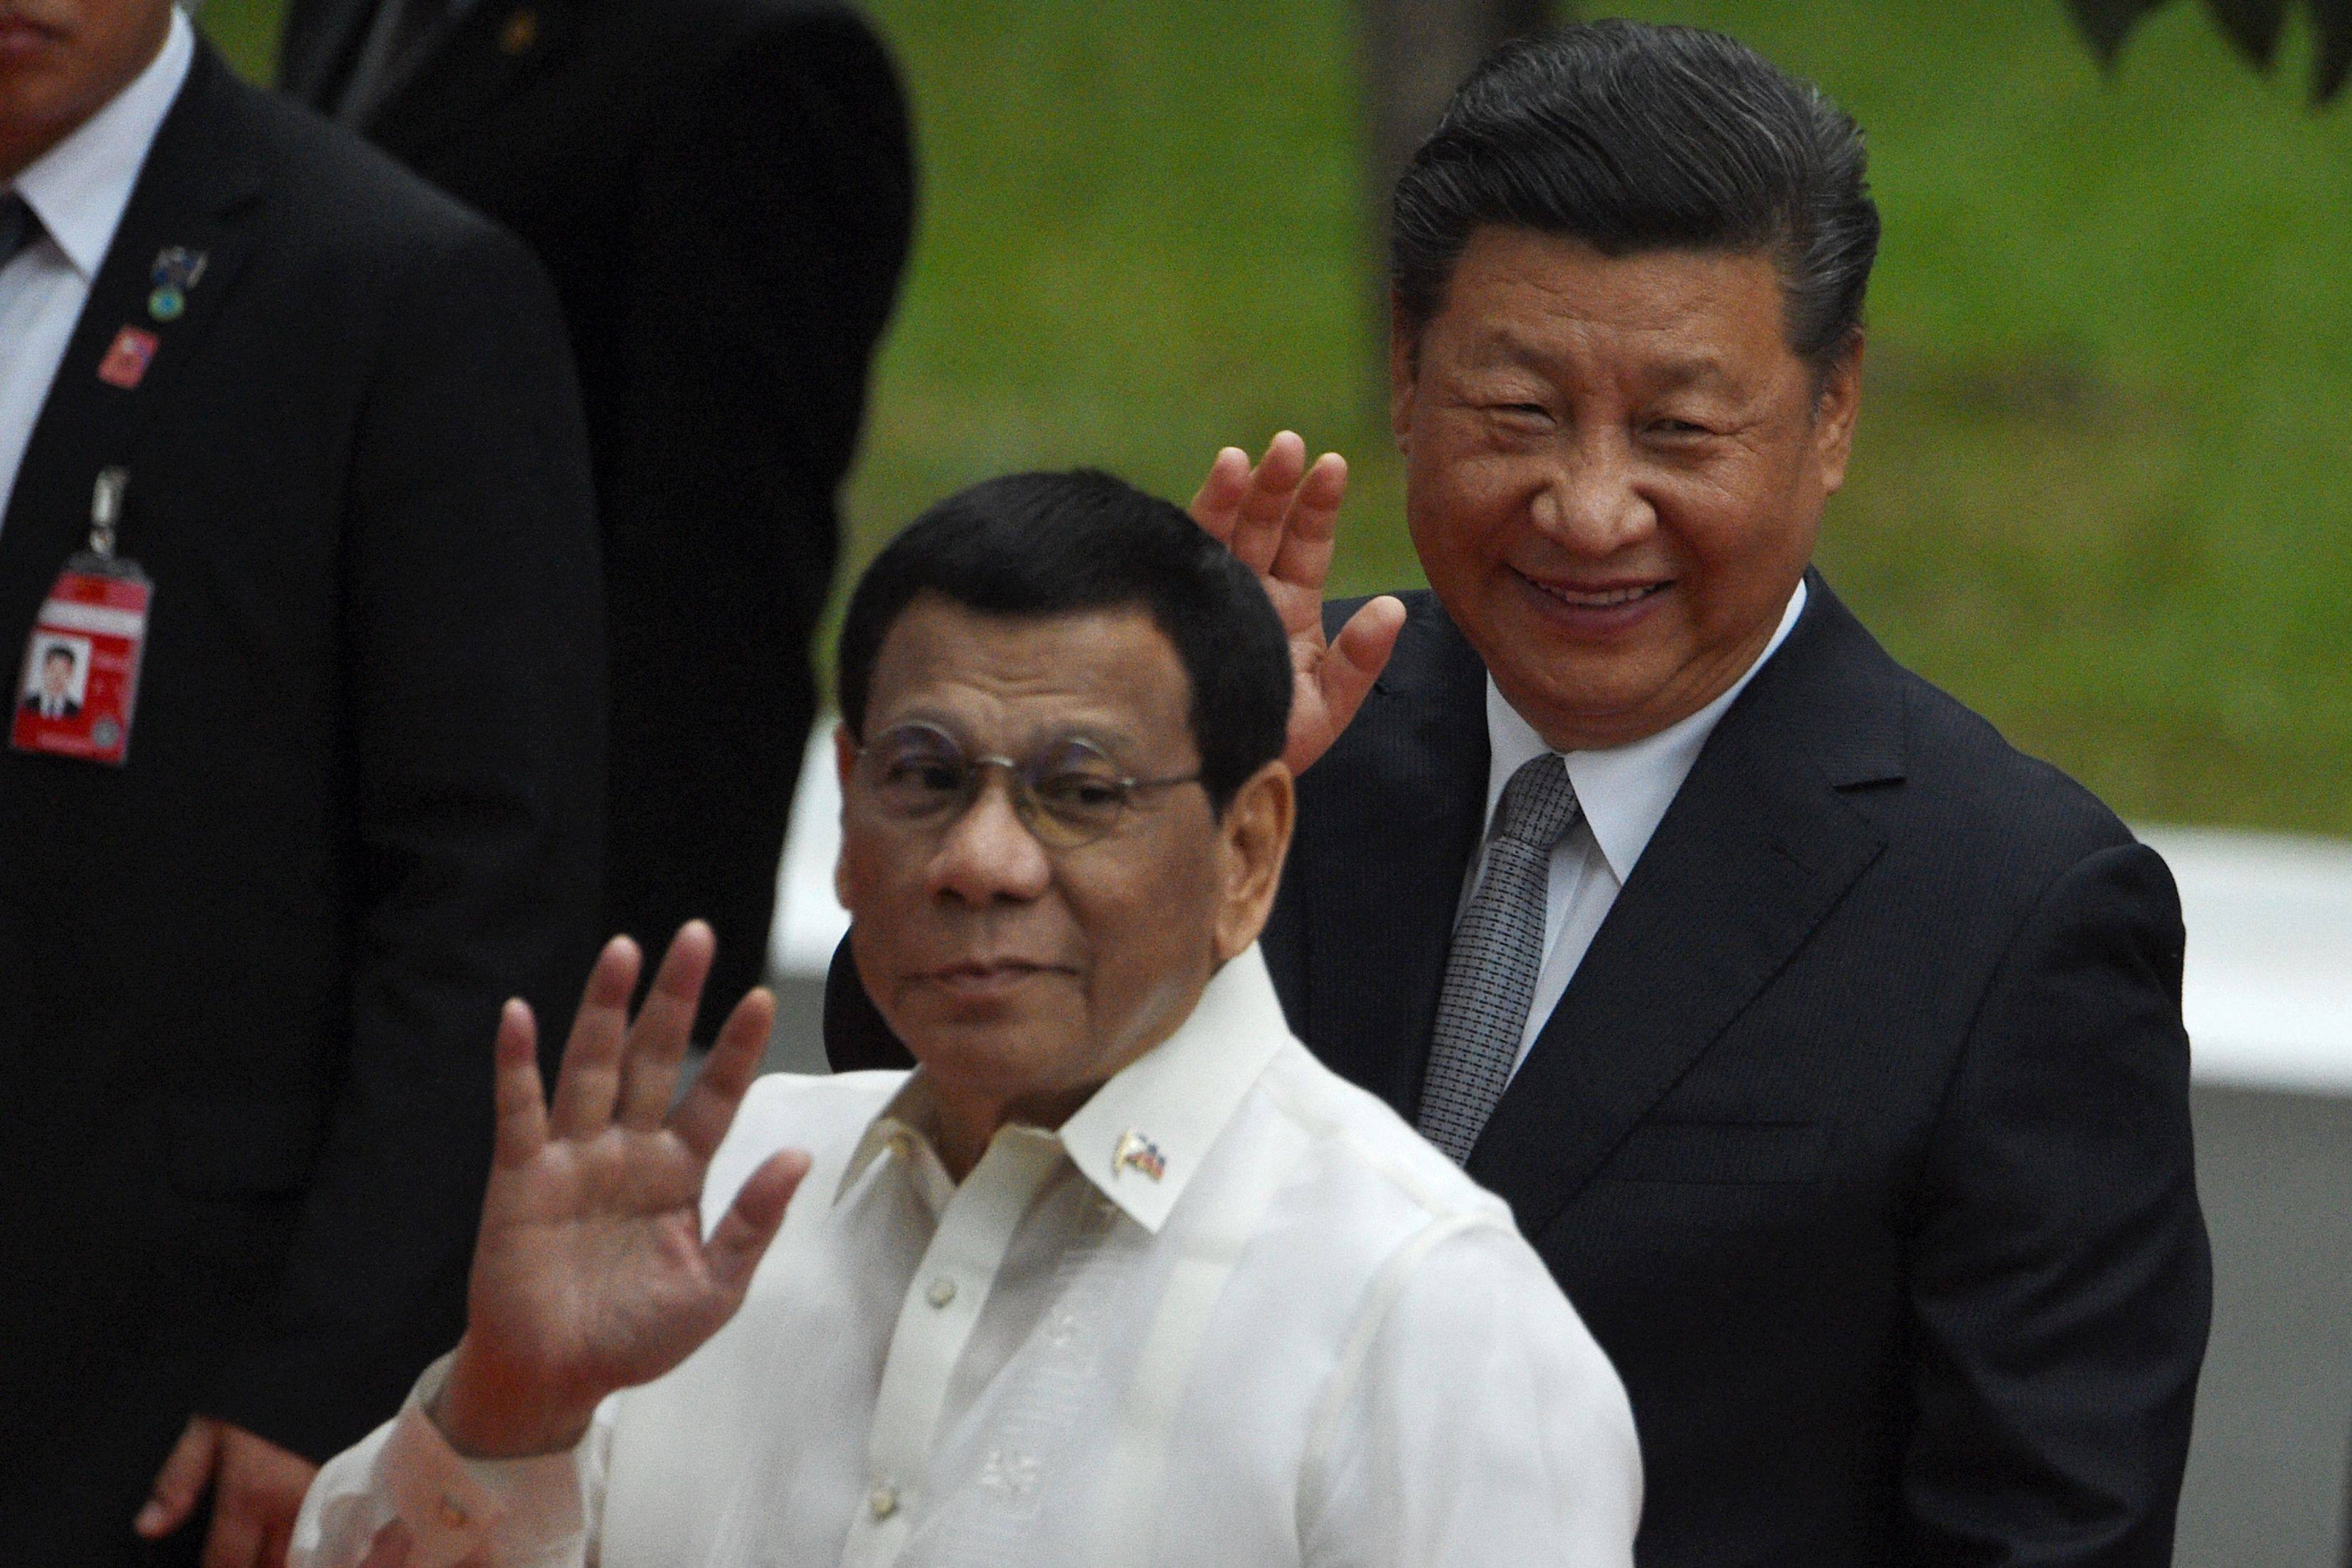 Chinese President Xi Jinping and then Philippine leader Rodrigo Duterte wave to journalists in Manila on November 20, 2018. File photo: AFP